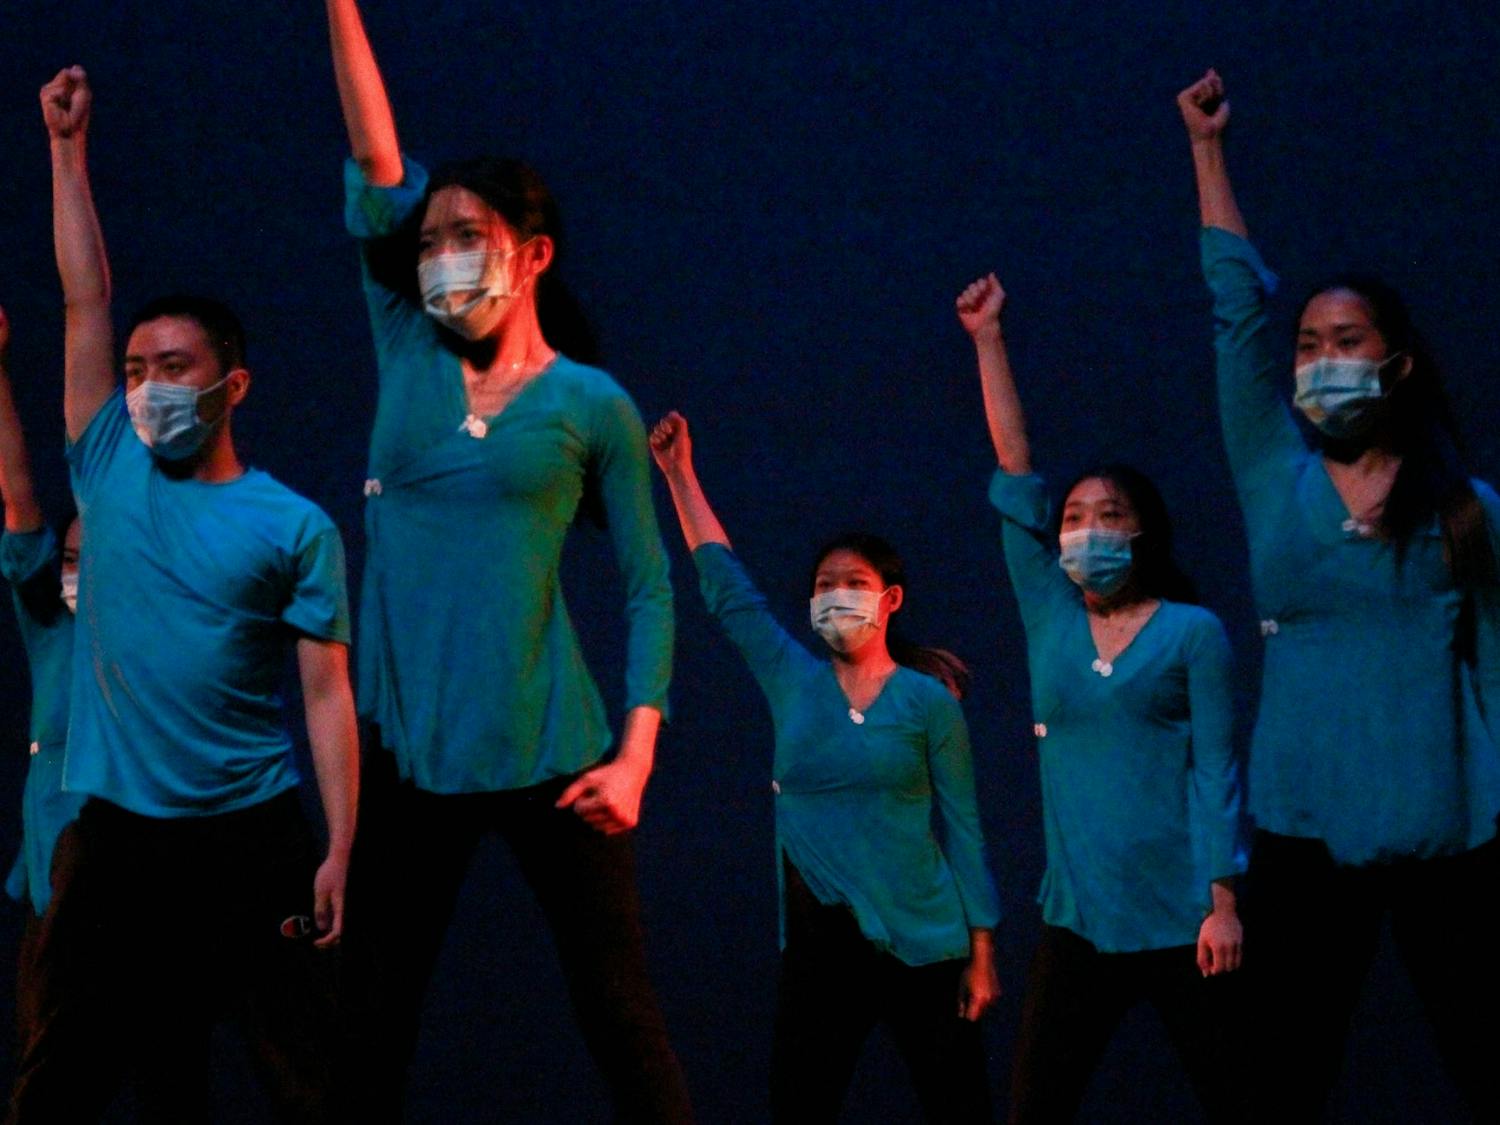 Duke Temptasians performed at UNC AASA's "Journey in Asia" event on Feb. 27, 2022 at Memorial Hall.